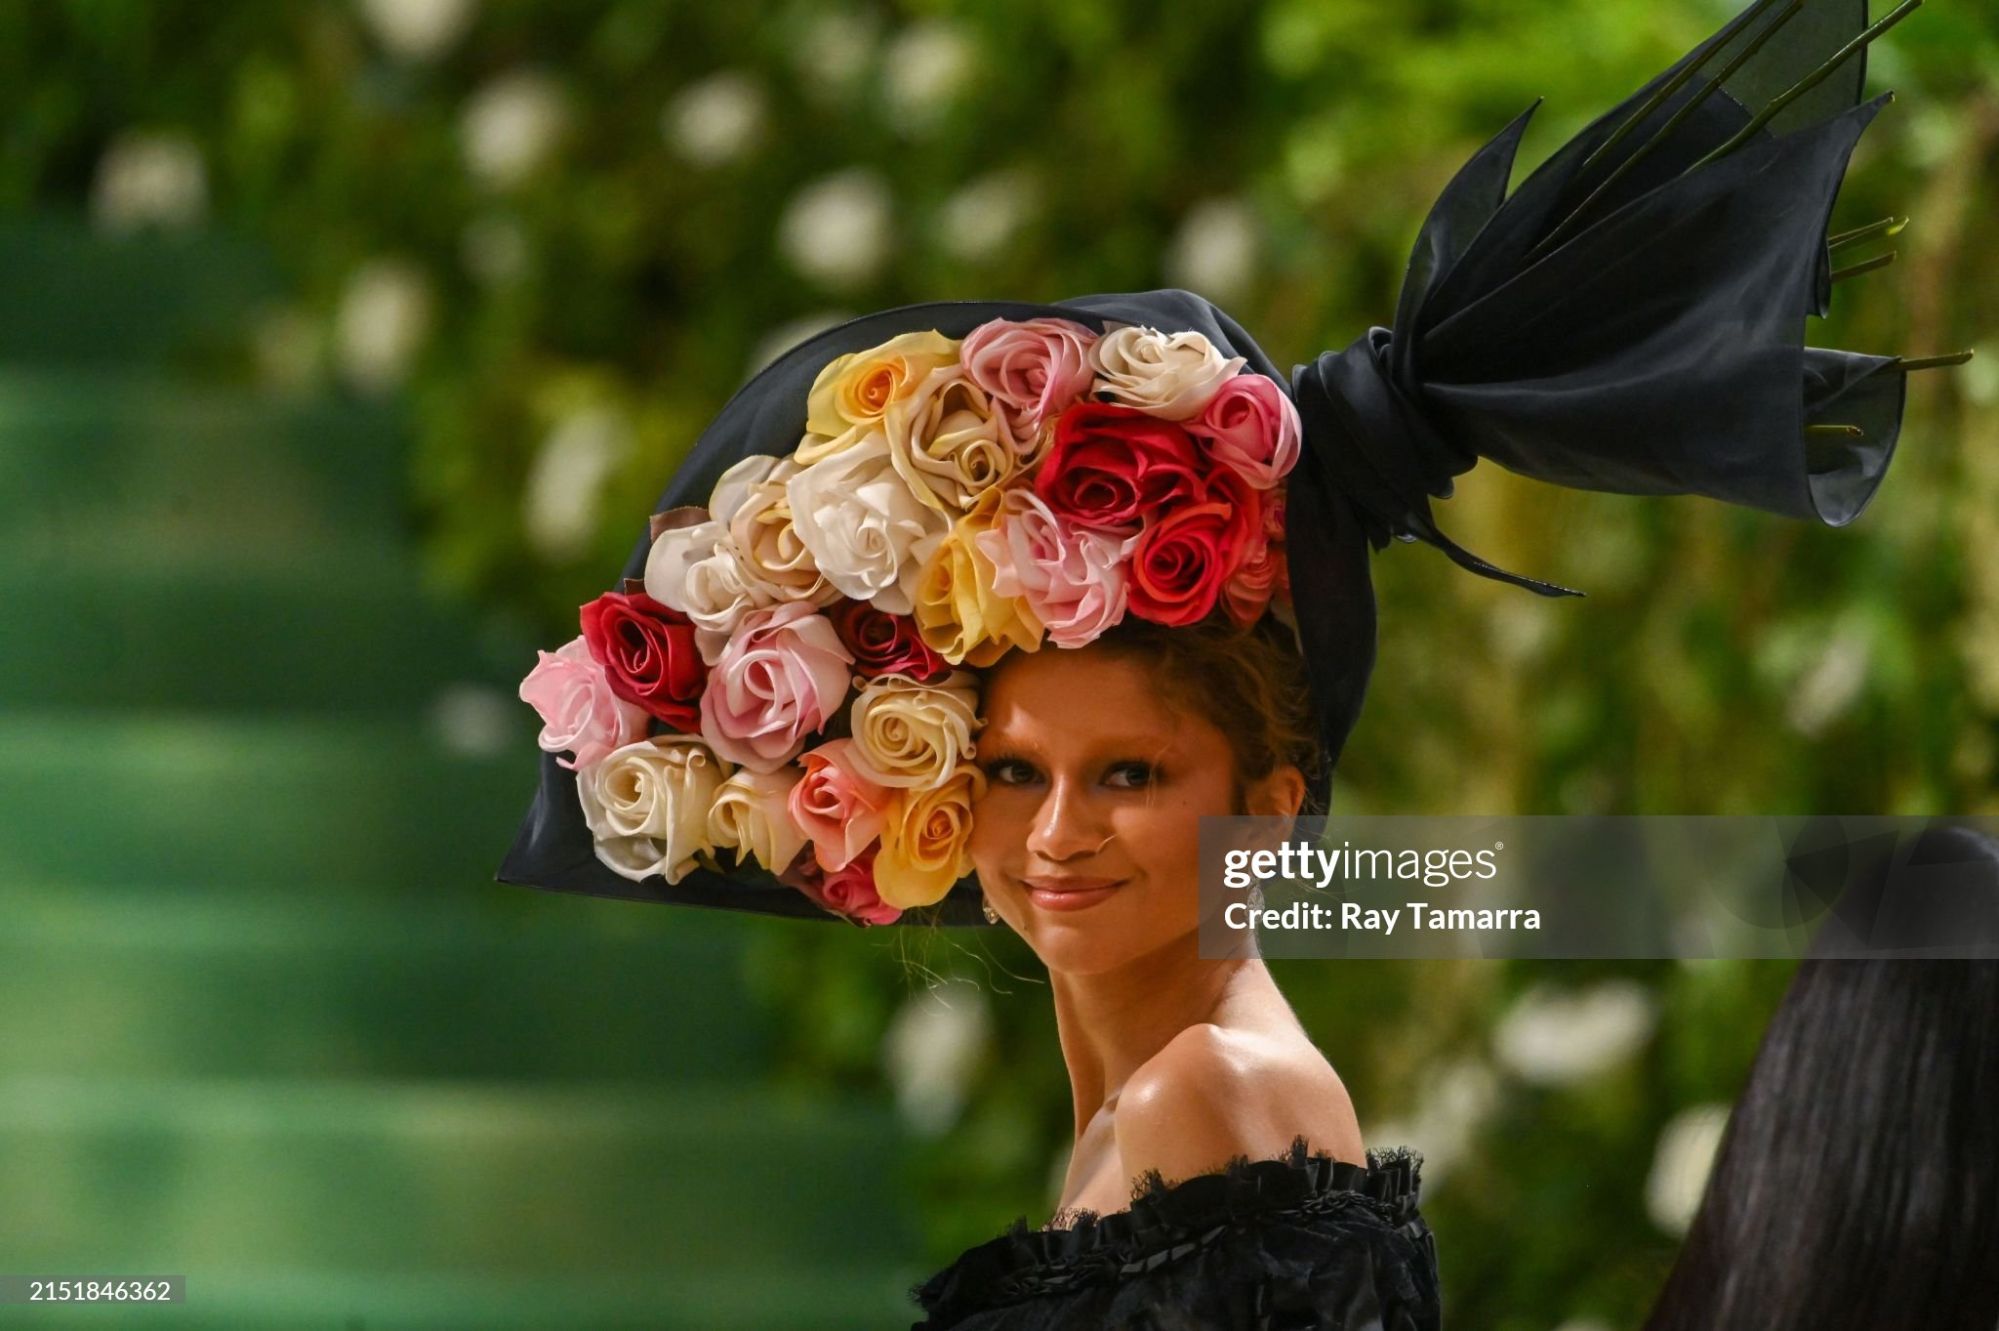 gettyimages-2151846362-2048x2048.jpg